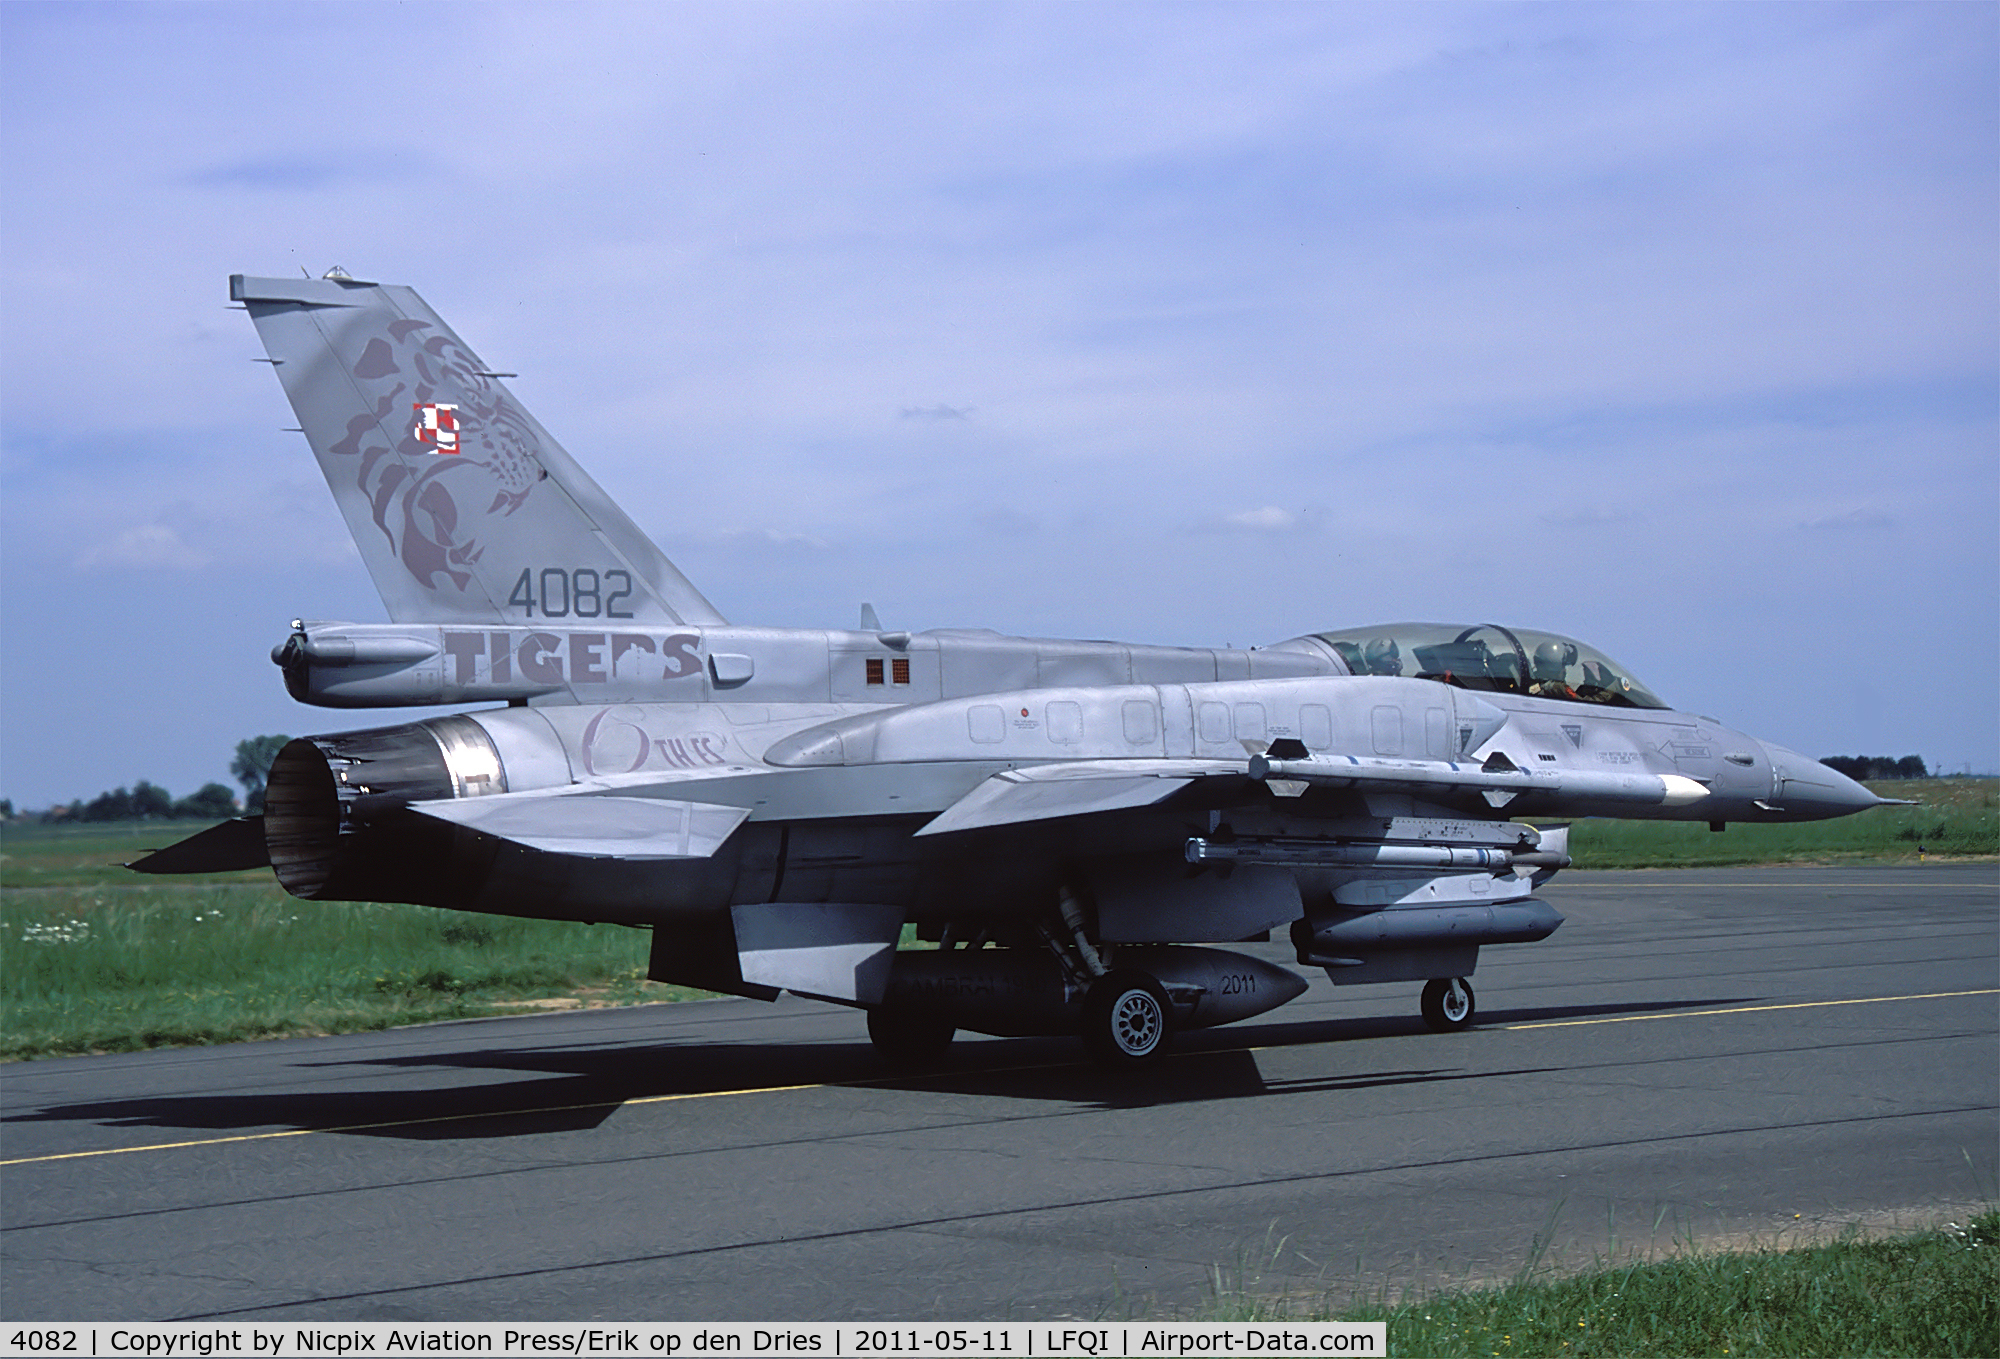 4082, Lockheed Martin F-16D Fighting Falcon C/N JD-7, Poland AF 6th FS is also a member of the Tigermeet association. 4082 was painted in a special livery for the 50th anniversary of the NATO Tigermeet at Cambrai AB.